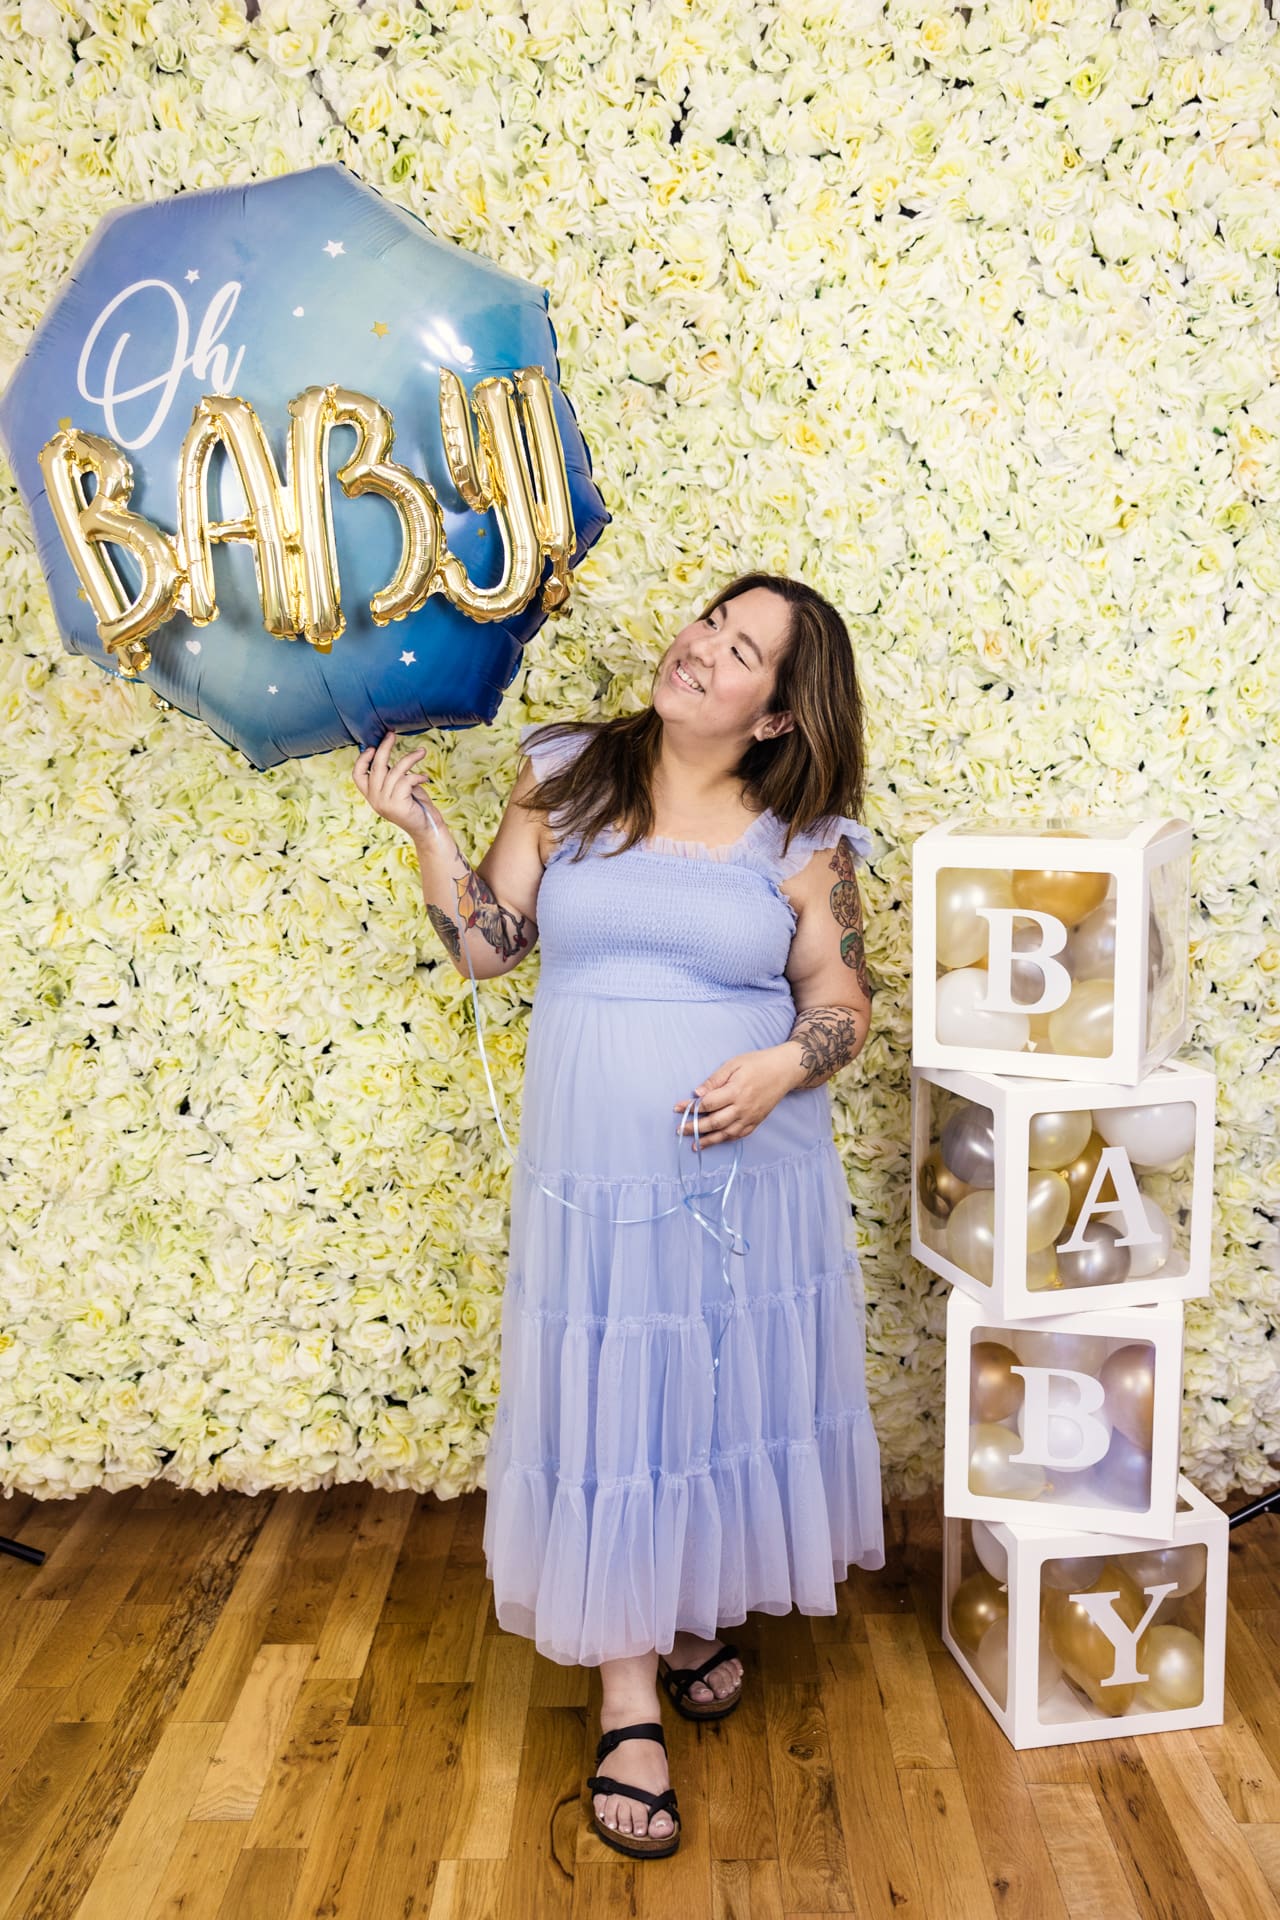 Candid photo of woman in blue dress holding Oh Baby balloon in front of floral wall during baby shower at Chicago private event space P&M Studio